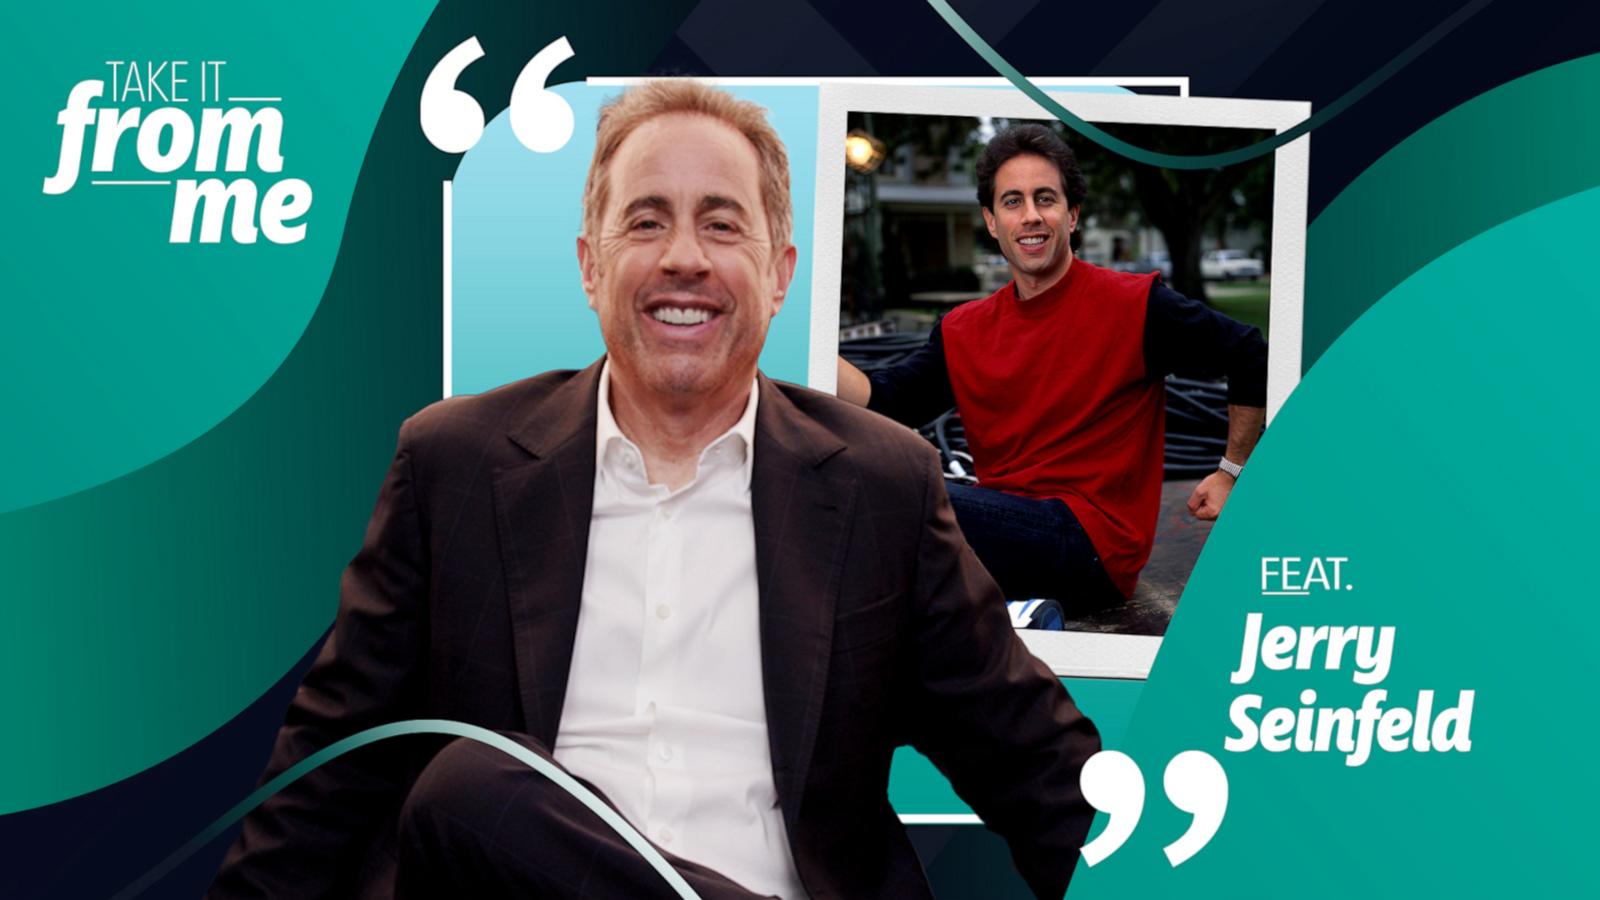 VIDEO: From 'Seinfeld' to 'Comedians in Cars,' Jerry Seinfeld revisits key career moments